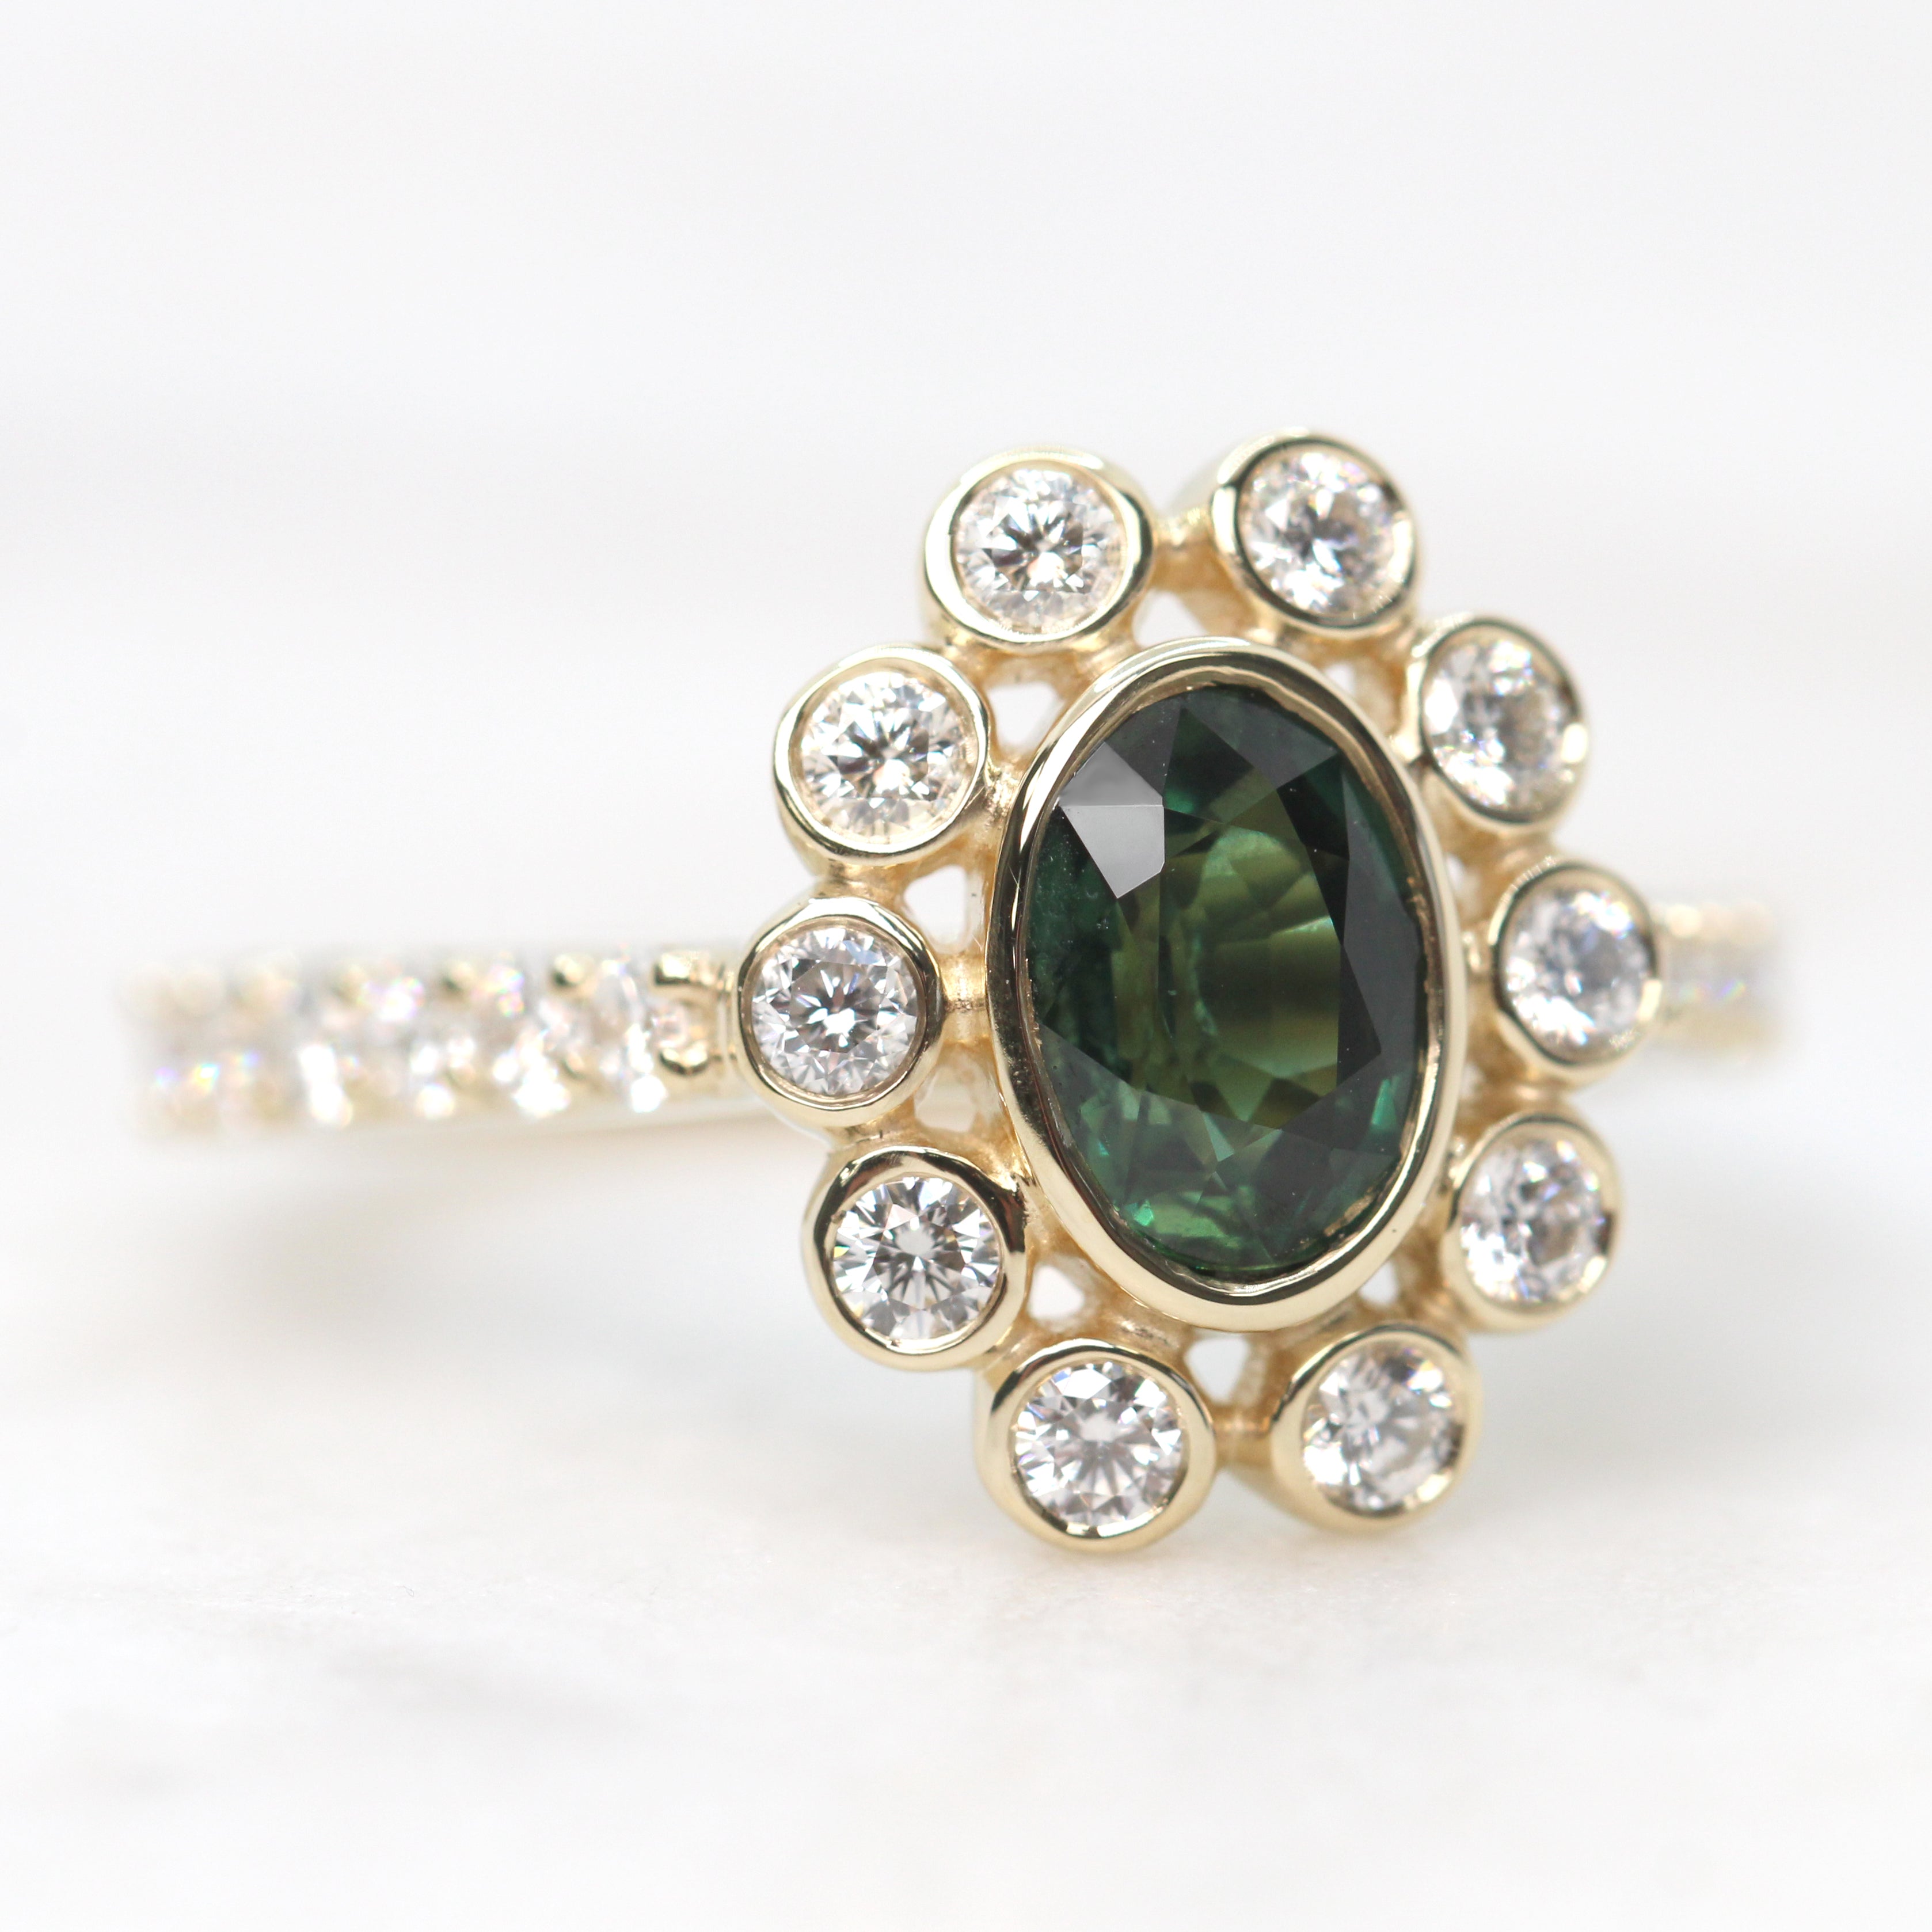 Minnie Ring with a 1.14 Carat Green Oval Australian Sapphire and White Accent Diamonds in 14k Yellow Gold - Ready to Size and Ship - Midwinter Co. Alternative Bridal Rings and Modern Fine Jewelry